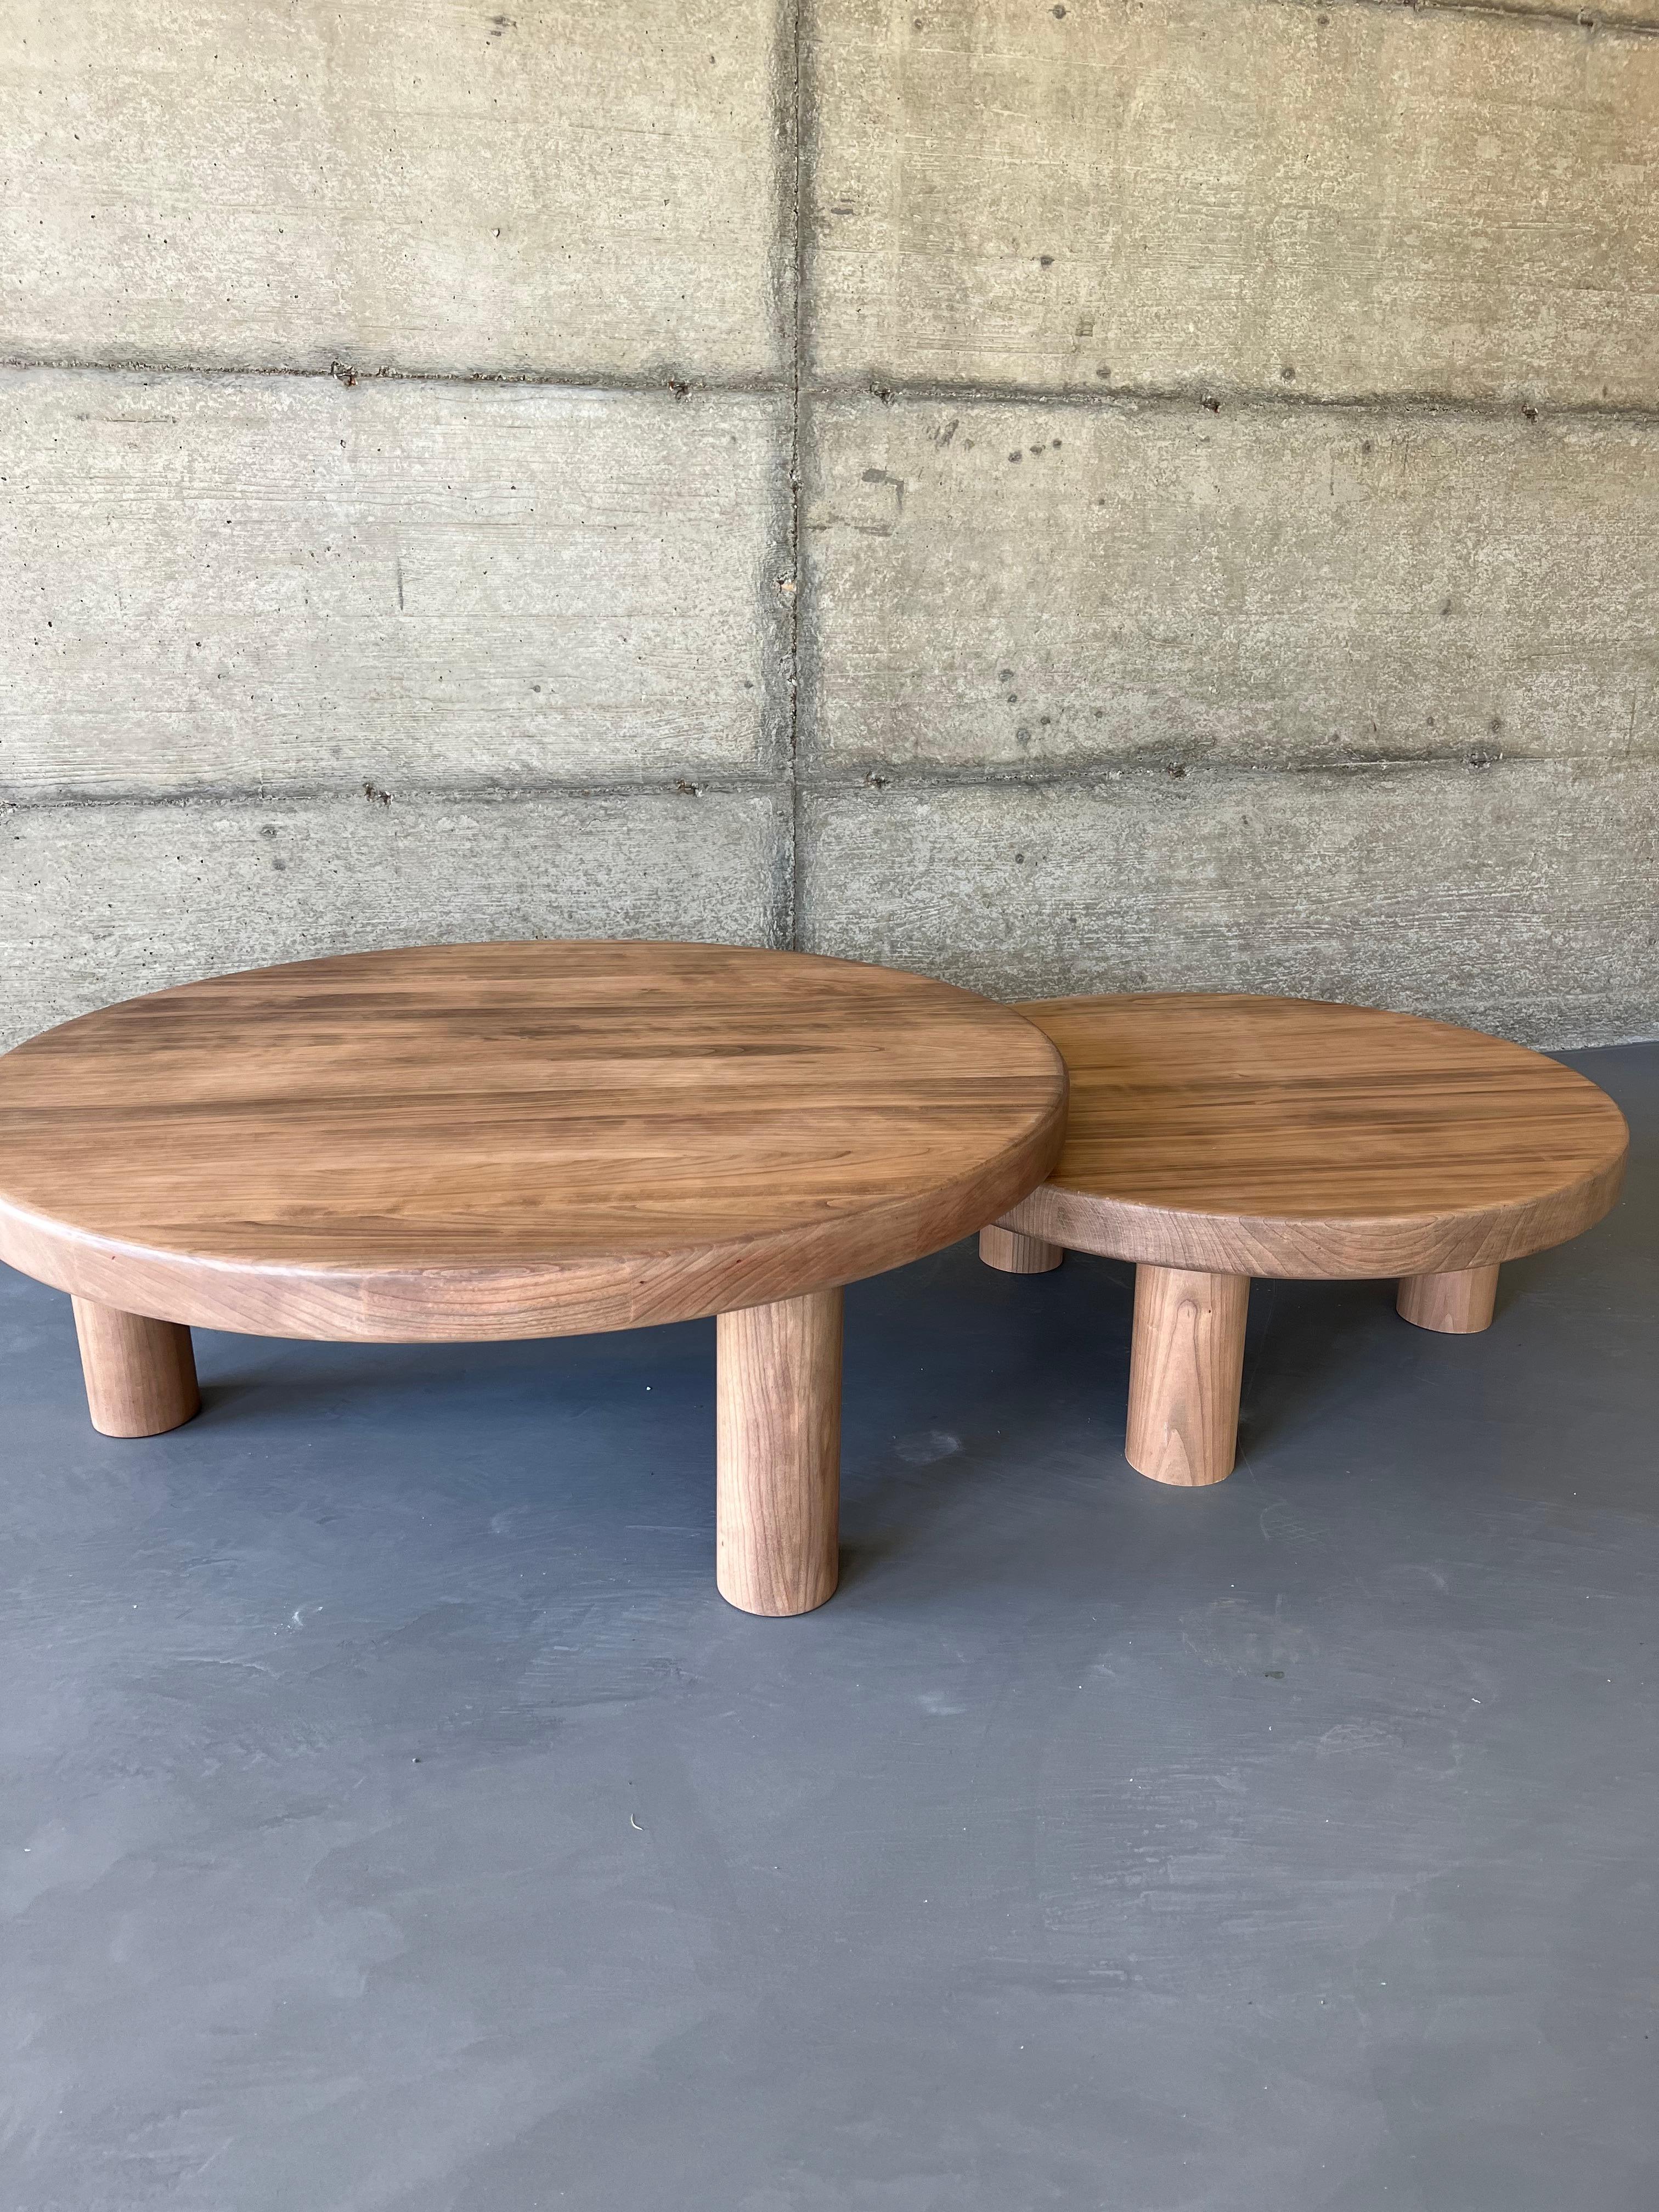 French contemporary edition. Superb duo of mid-century-style coffee tables in solid cherry wood, offered here in a matt varnished finish. Their 6 cm thick tops and their 3 tubular legs give them an airy elegance perfect as a coffee table. It will